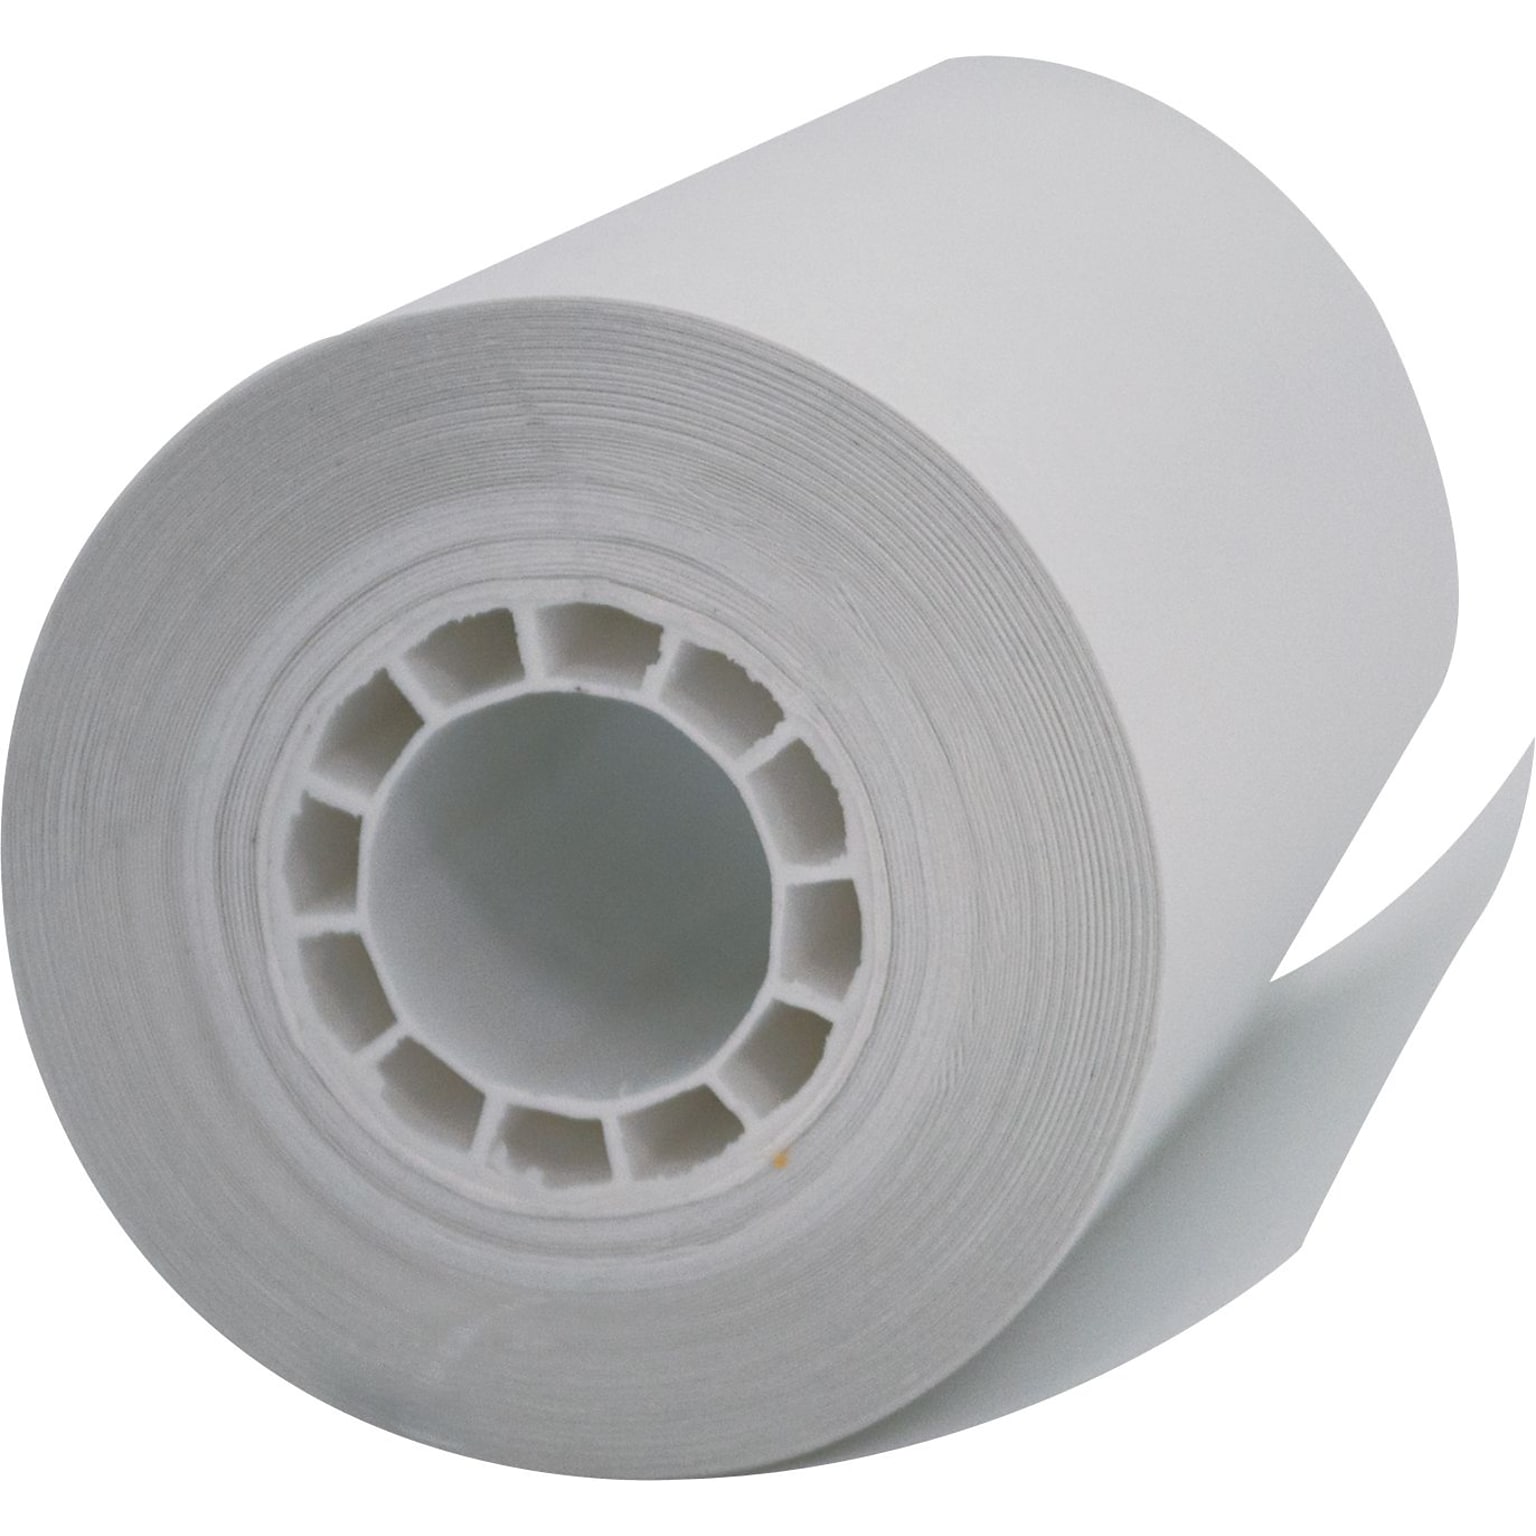 PM Company Thermal Cash Register/POS Paper Rolls, 2 1/4 x 55 Ft., White, 50 Rolls/Carton (PMC05262X)